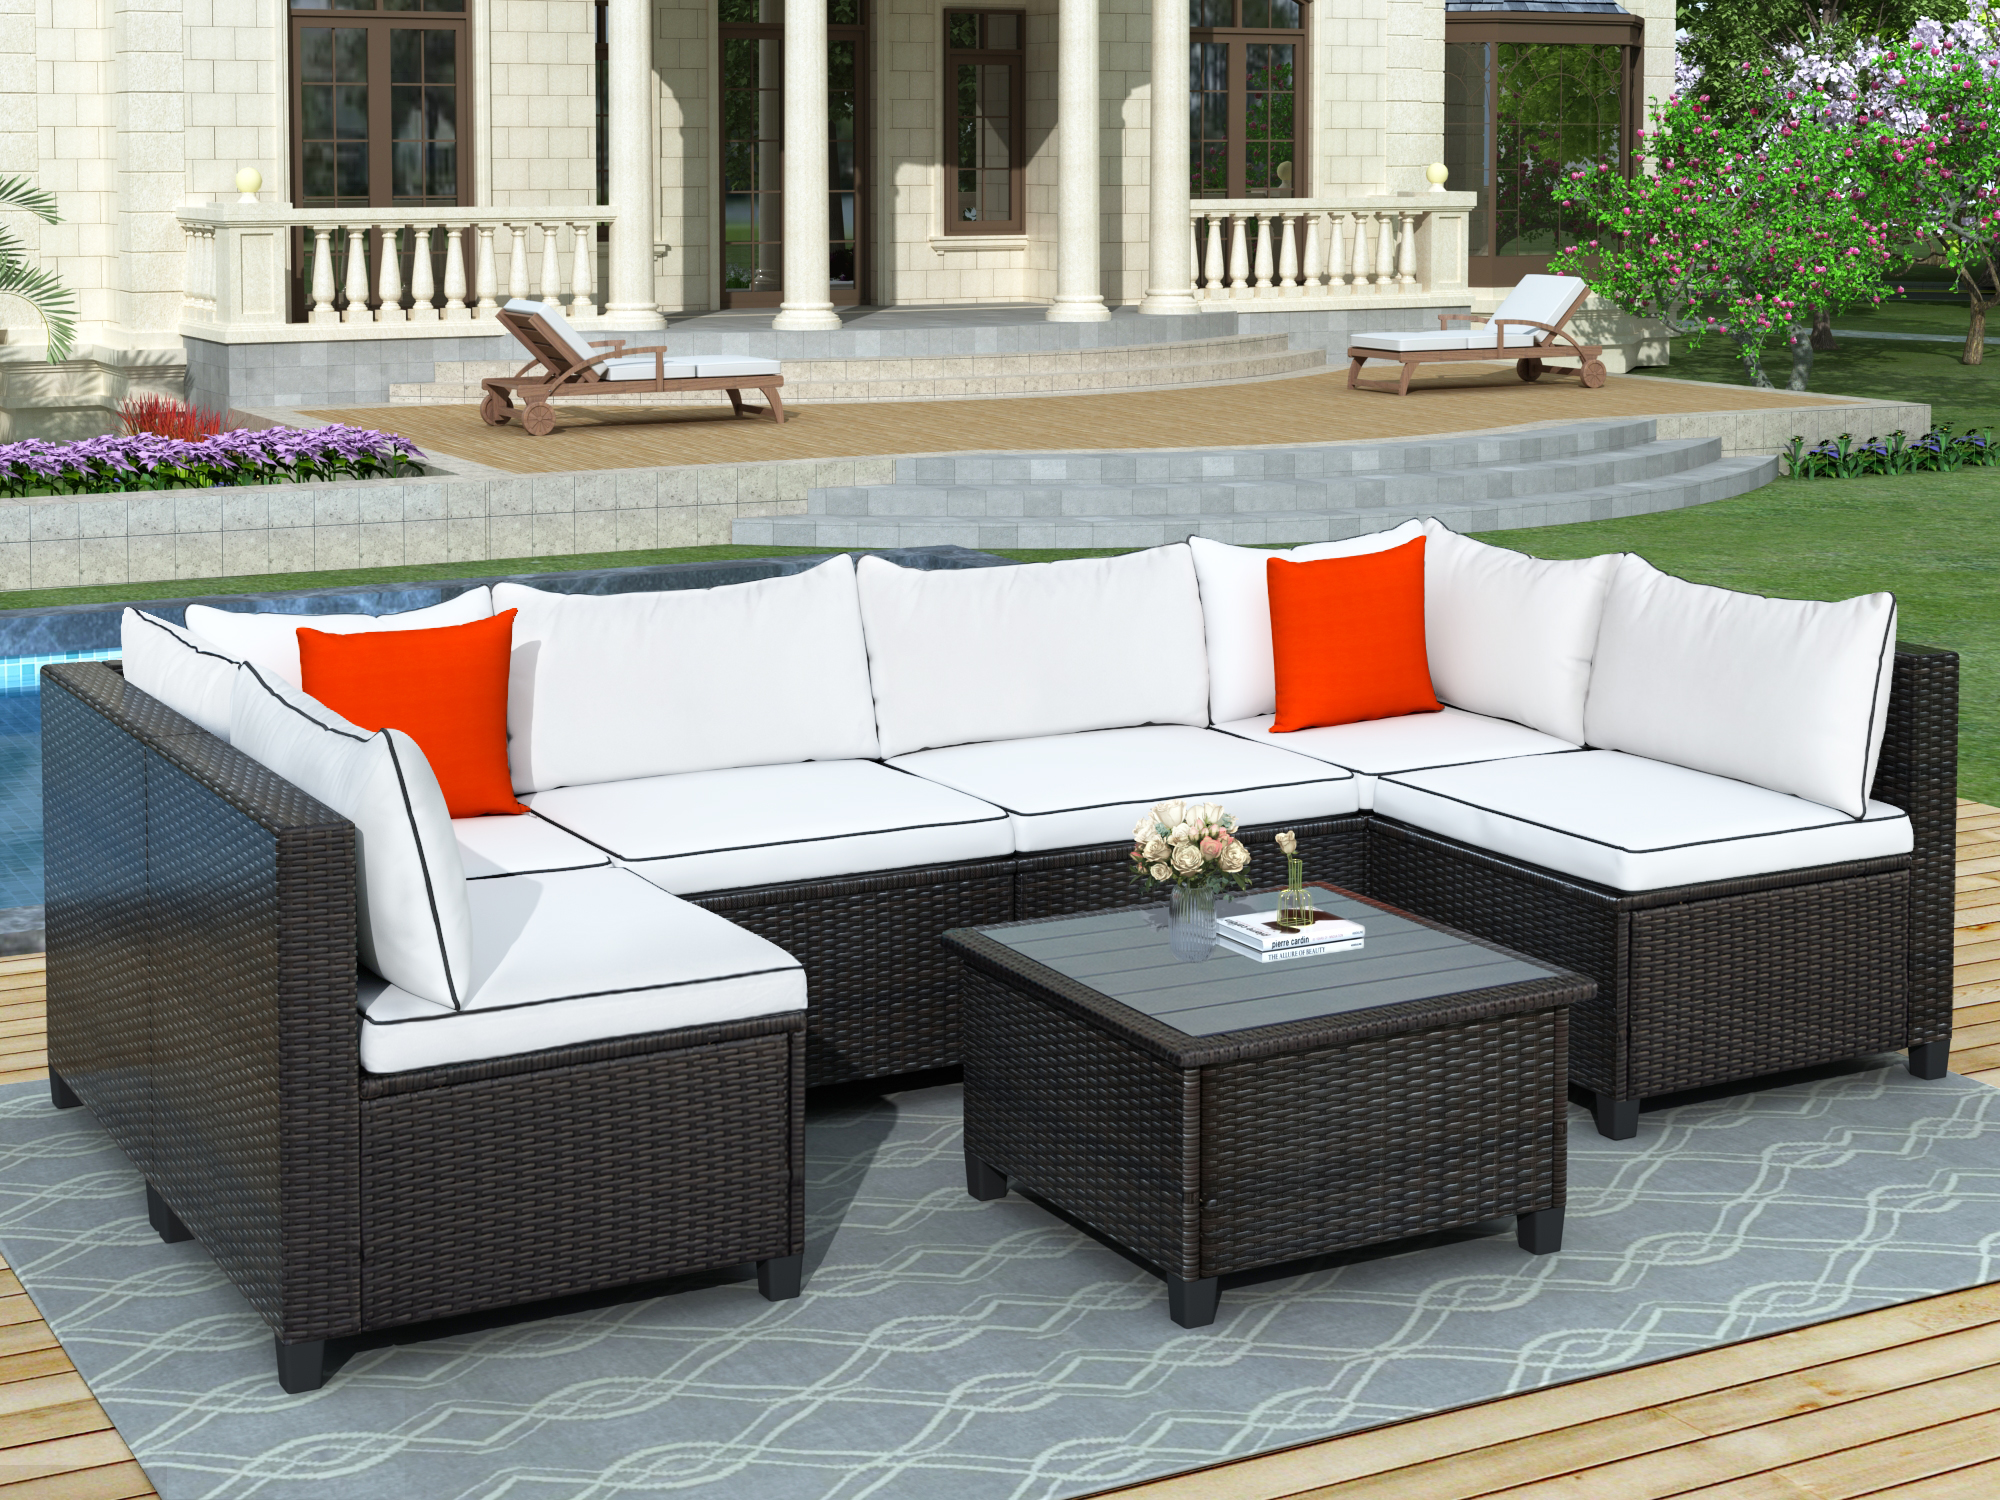 7-Piece Patio Furniture Sets on Sale, SEGMART 7-Piece Wicker Patio Conversation Furniture Set w/ Seat Cushions & wood Coffee Table, Wicker Sofa Sets for Porch Poolside Backyard Garden, S9078 - image 2 of 8